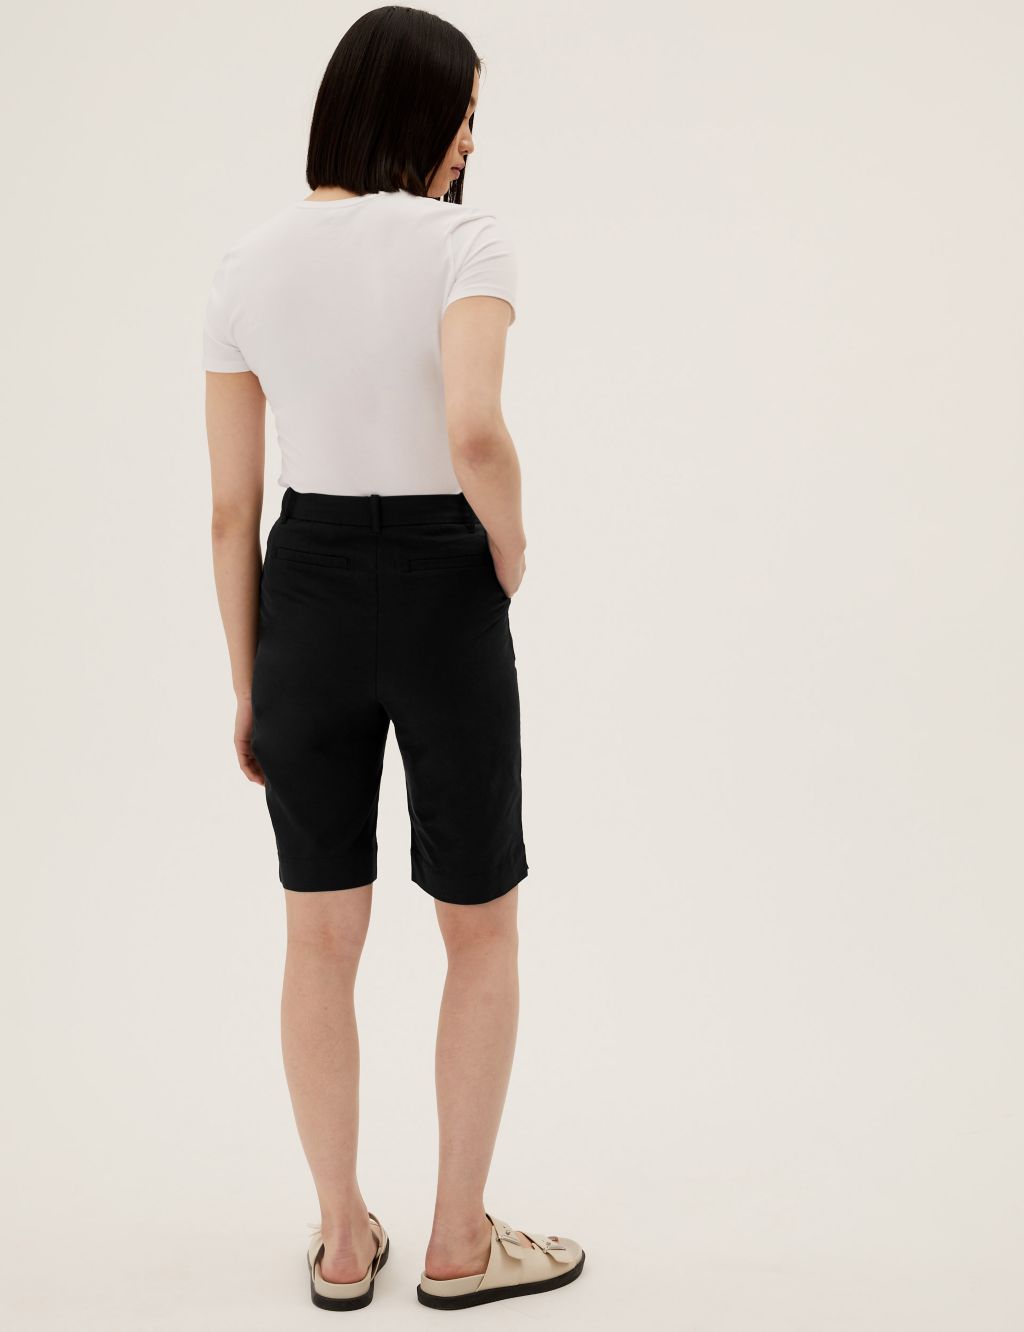 Cotton Rich Knee Length Chino Shorts image 3